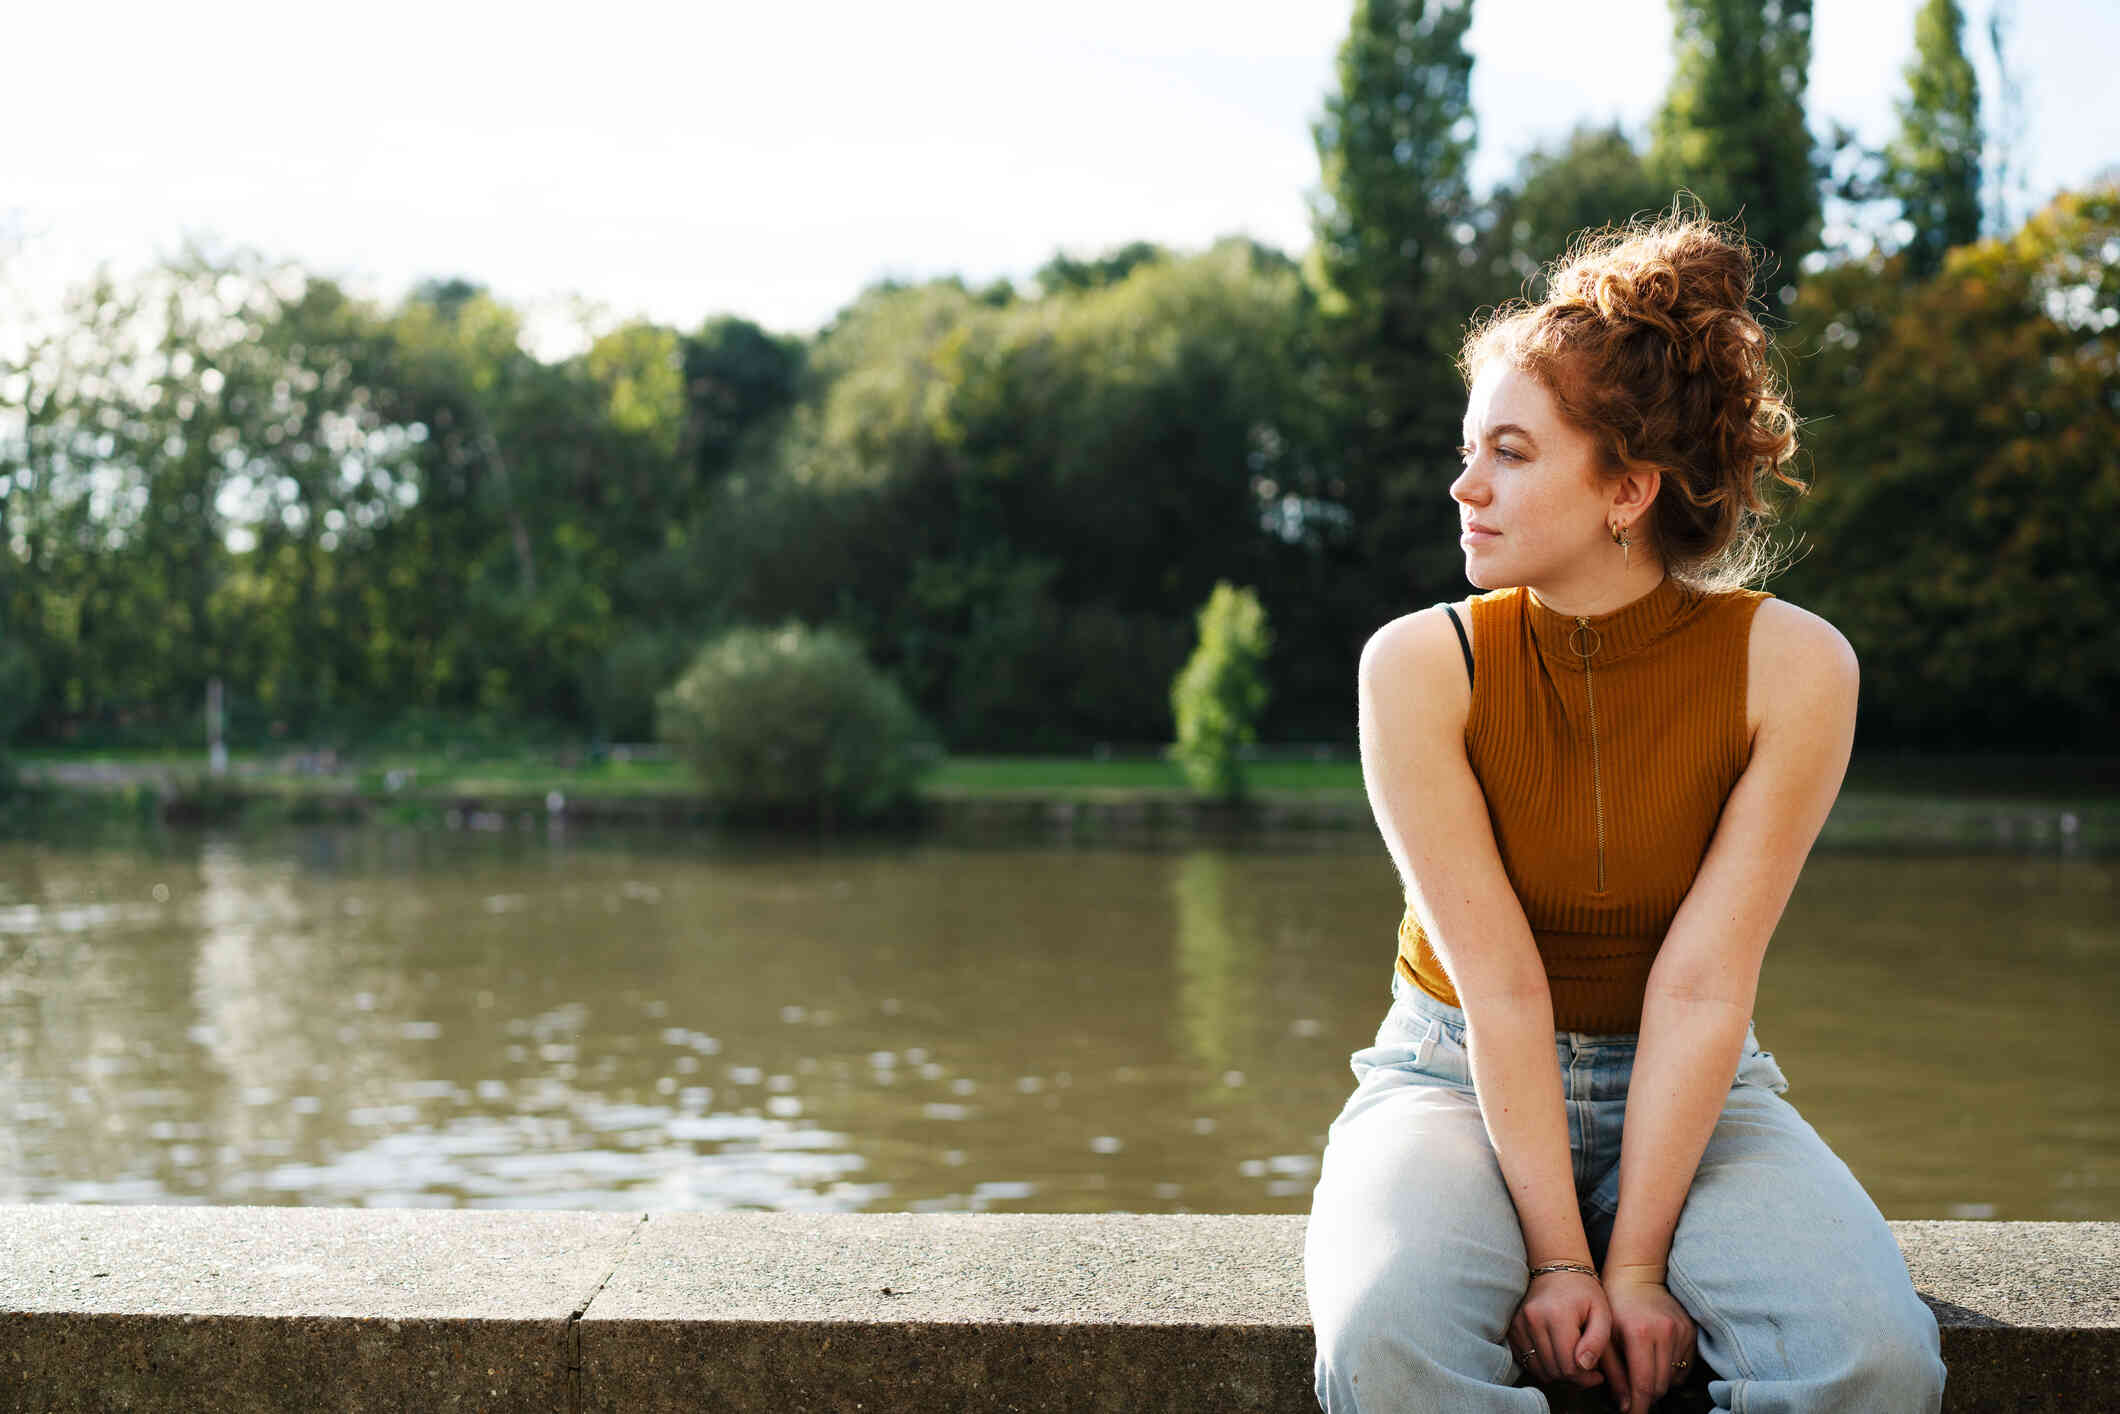 A woman in an orange top sits on a cement ledge near a body of water and gazes off while deep in thought.